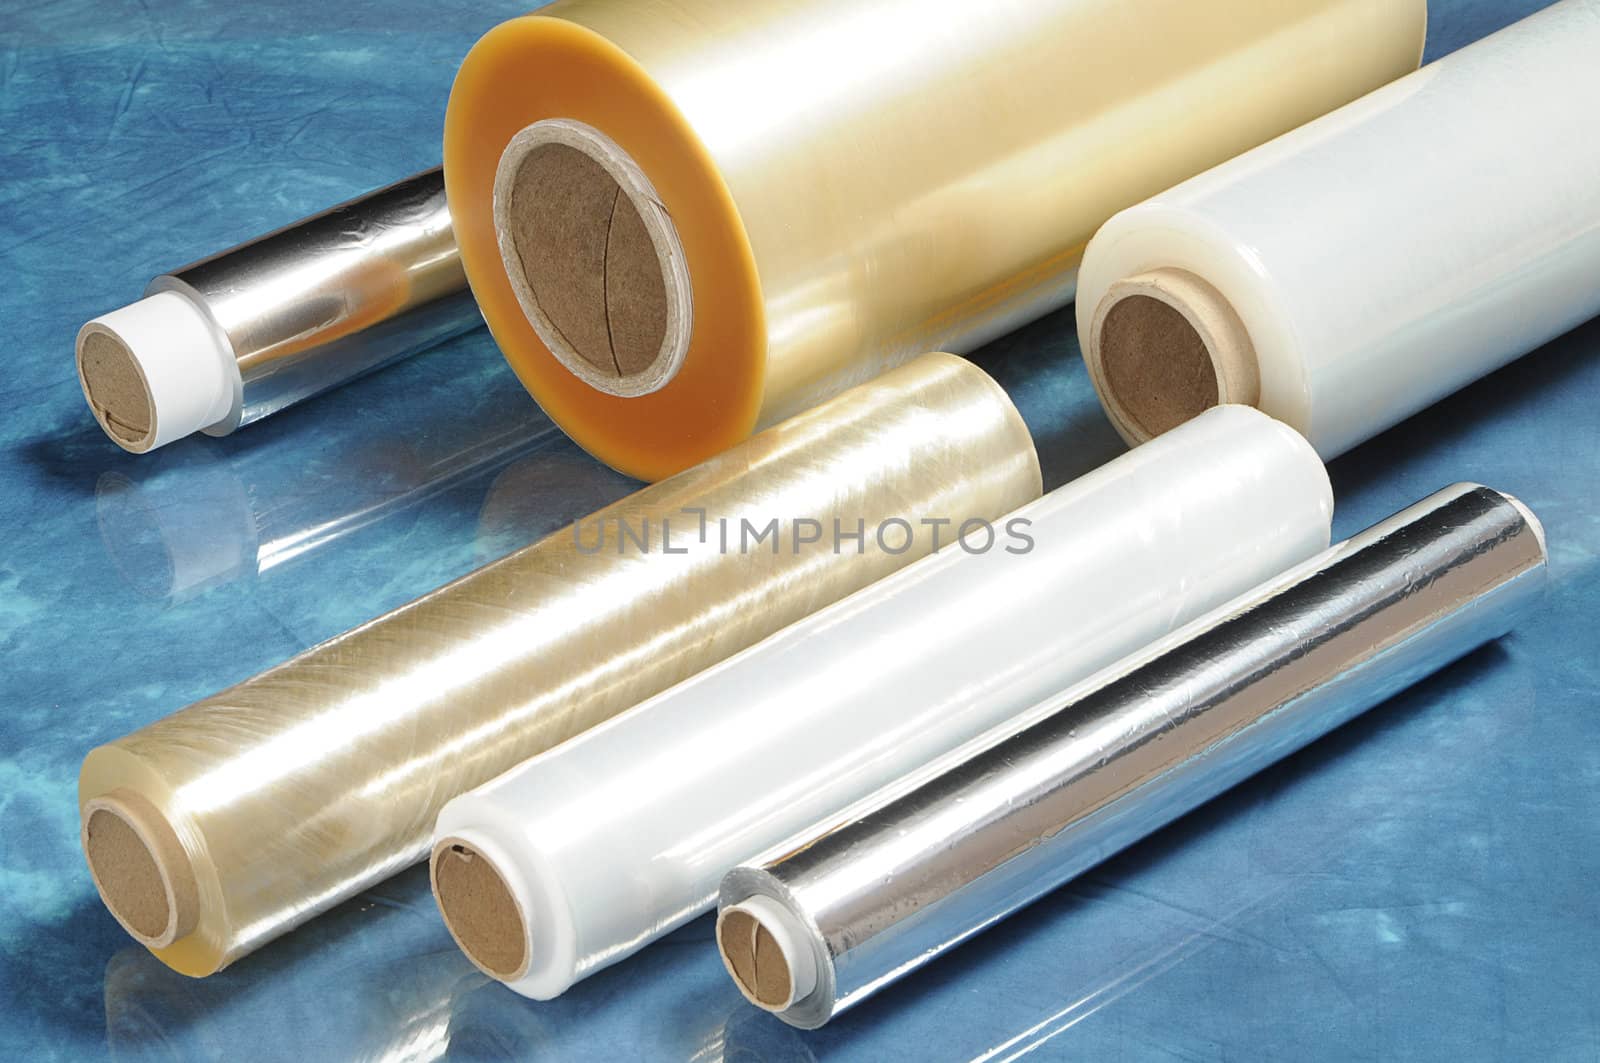 Rolls of film for vacuum packaging of foods and food foil